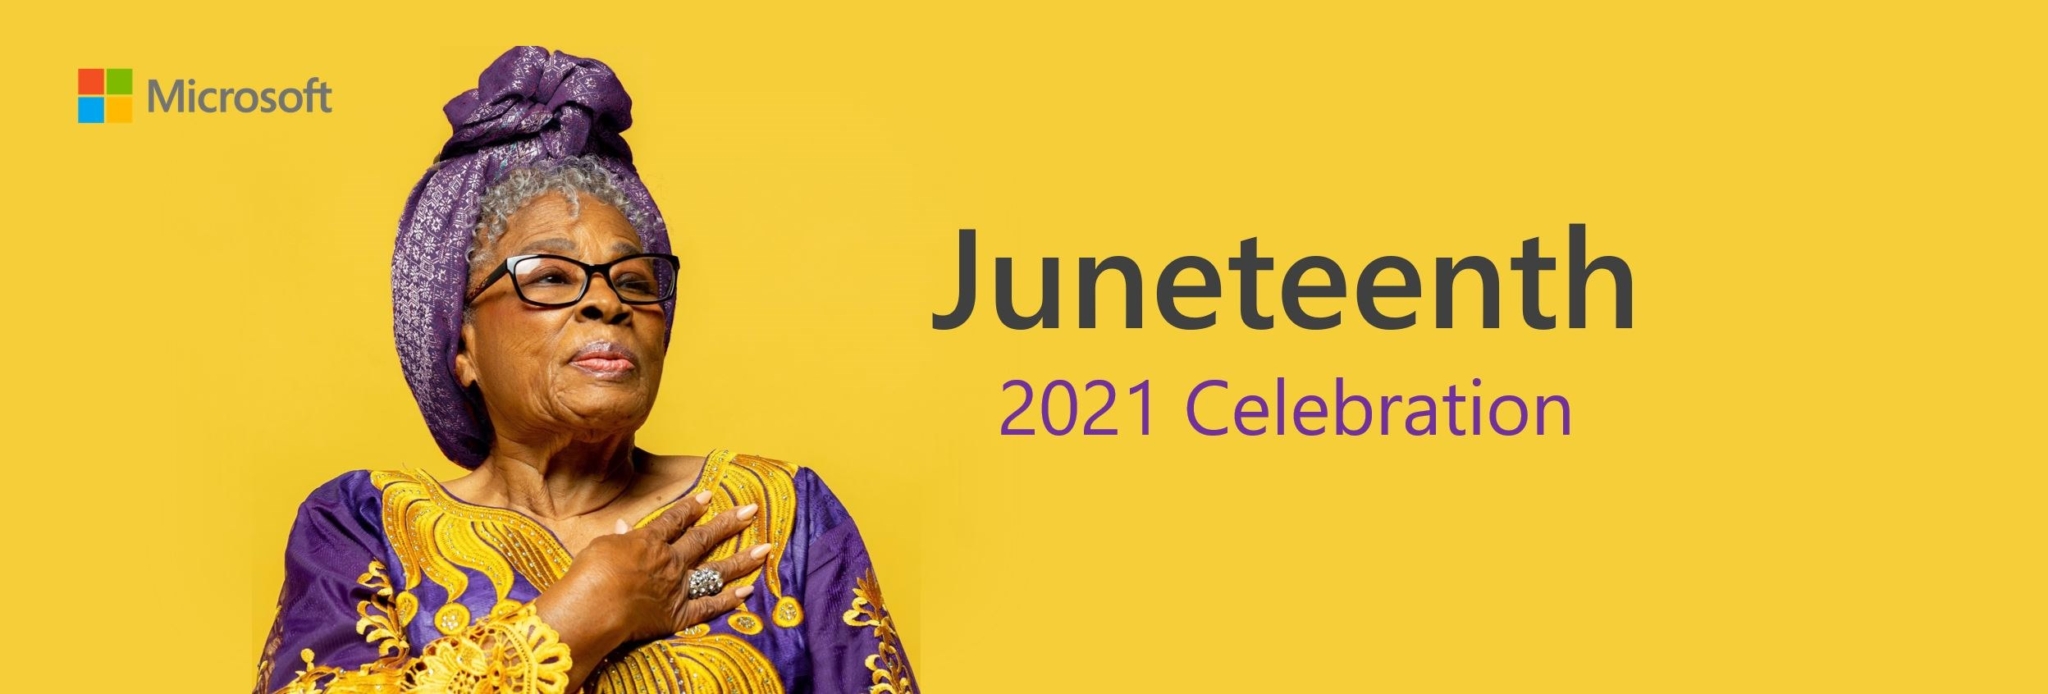 Juneteenth Banner 1 scaled 2021 Juneteenth Celebration by Microsoft